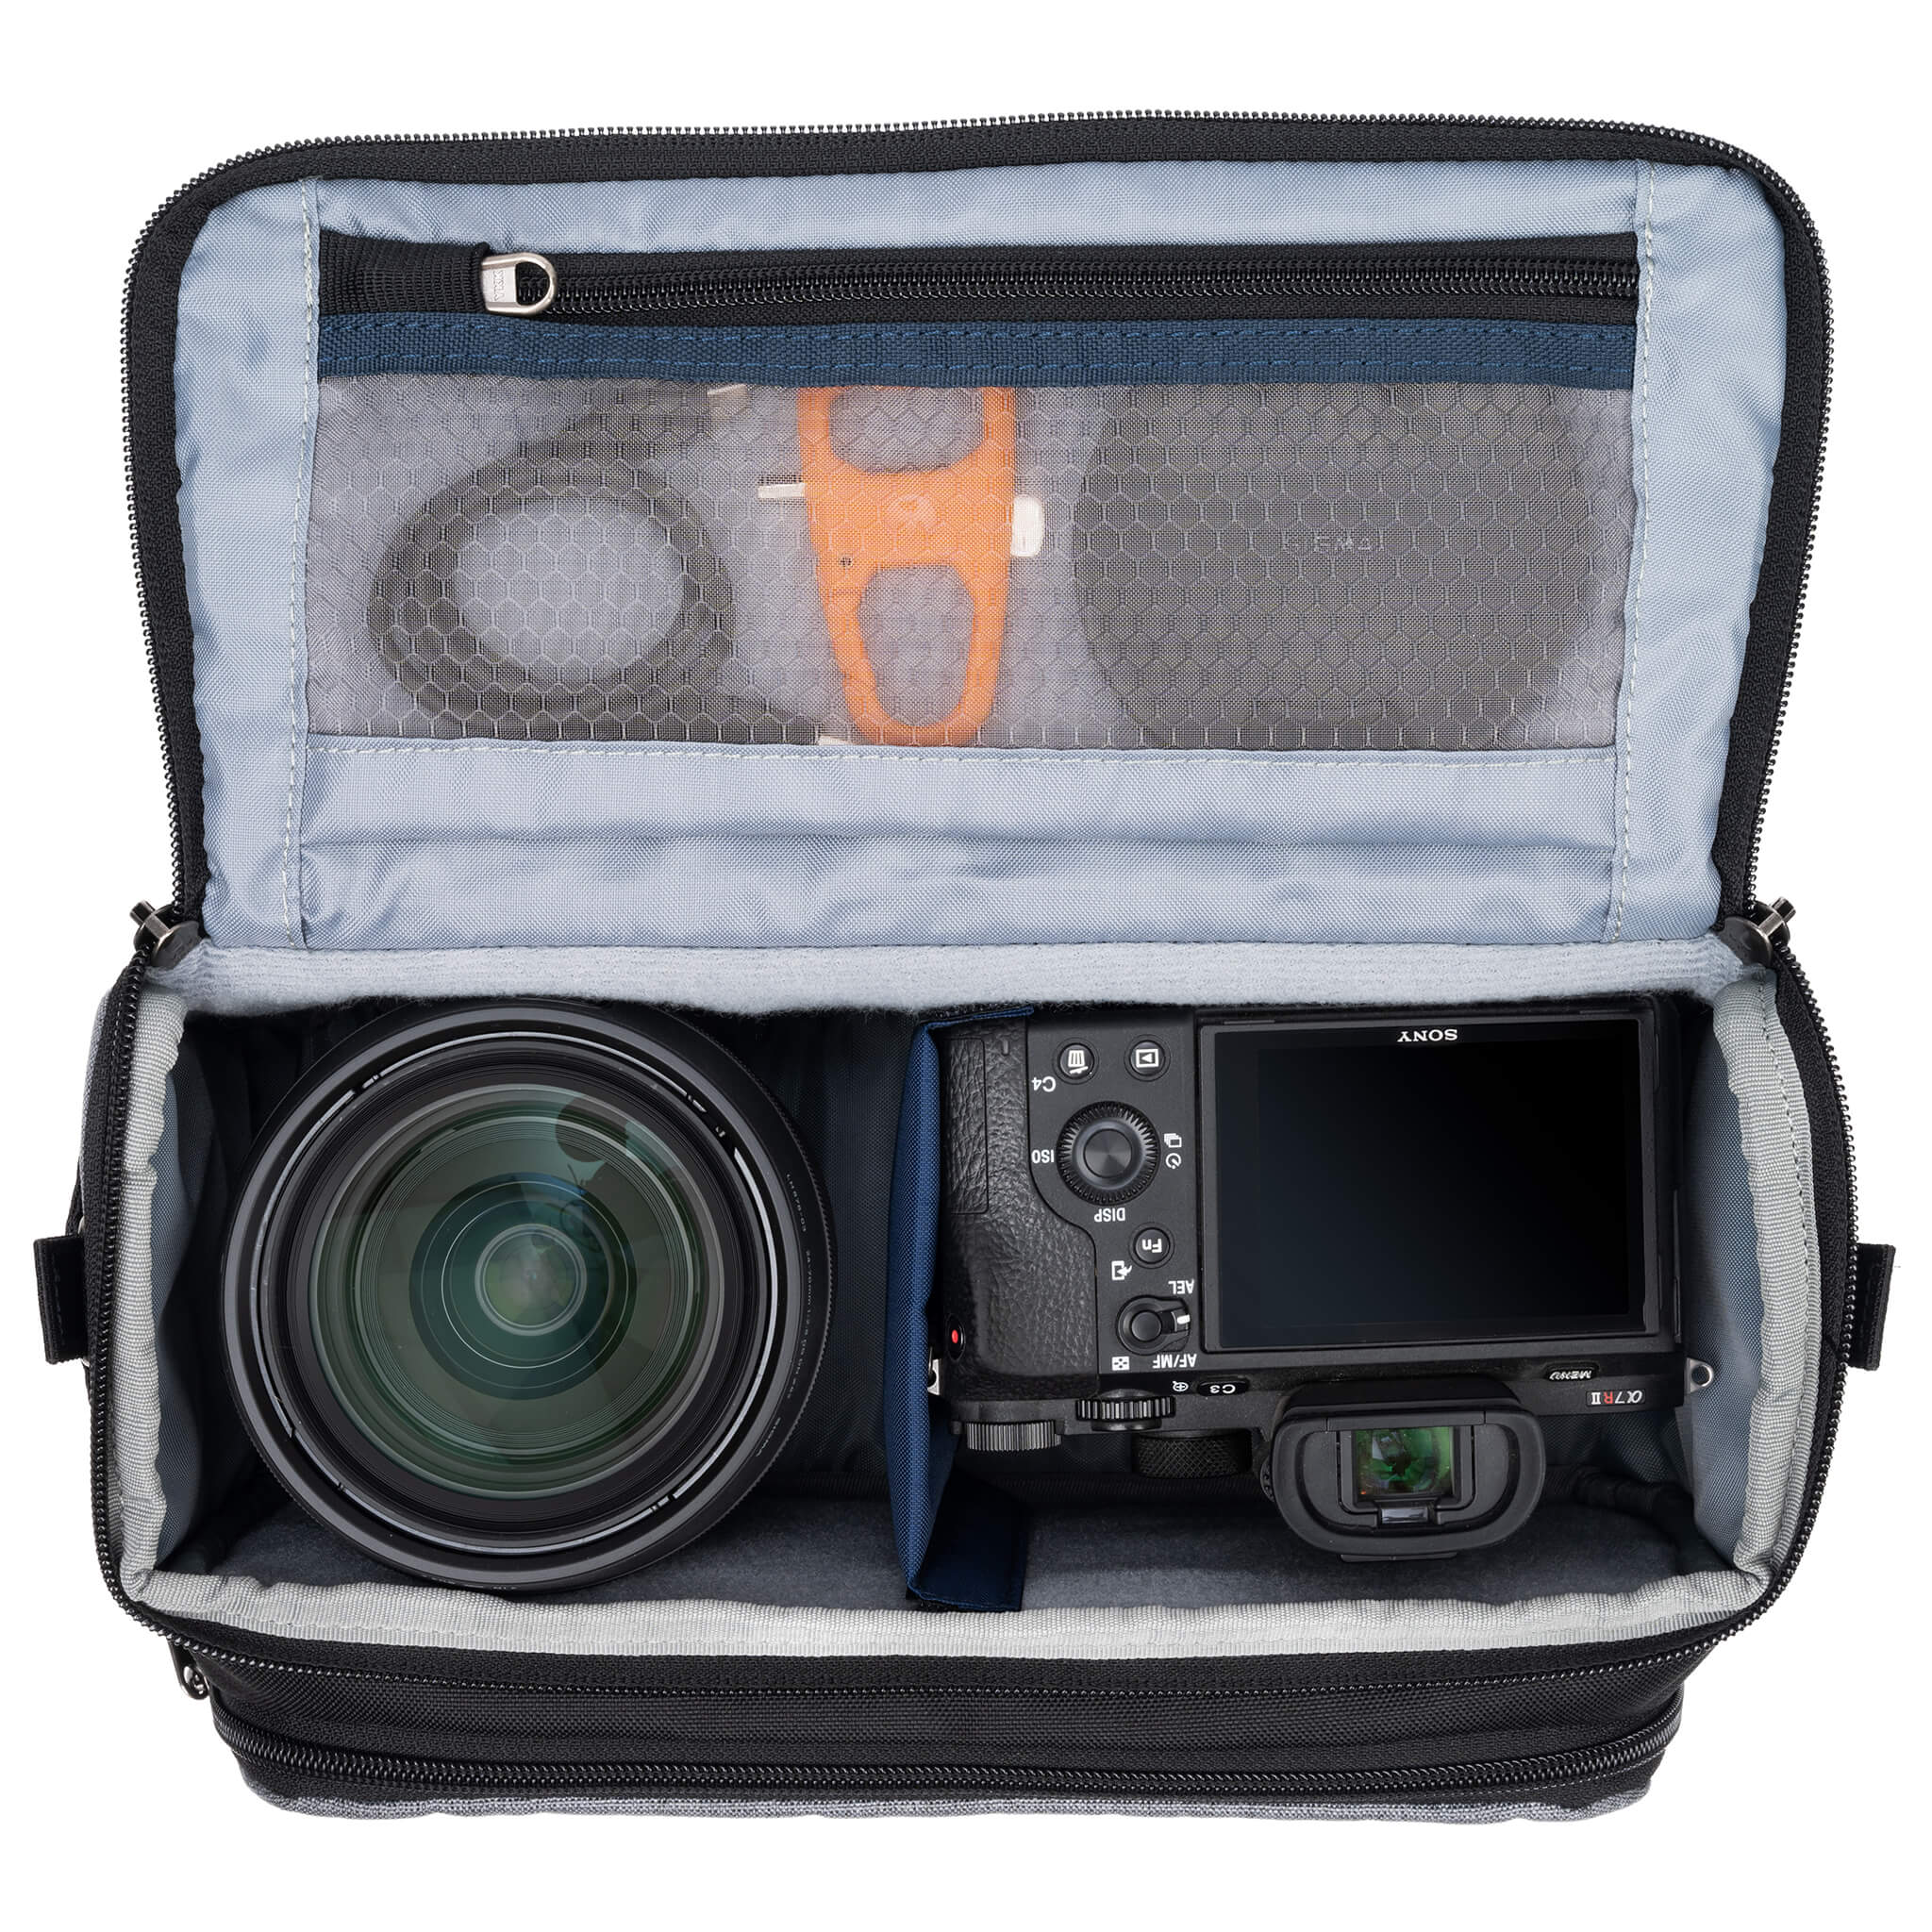 Fits one standard mirrorless body plus 2 to 3 lenses: short to medium f/4 zooms or short to medium primes.